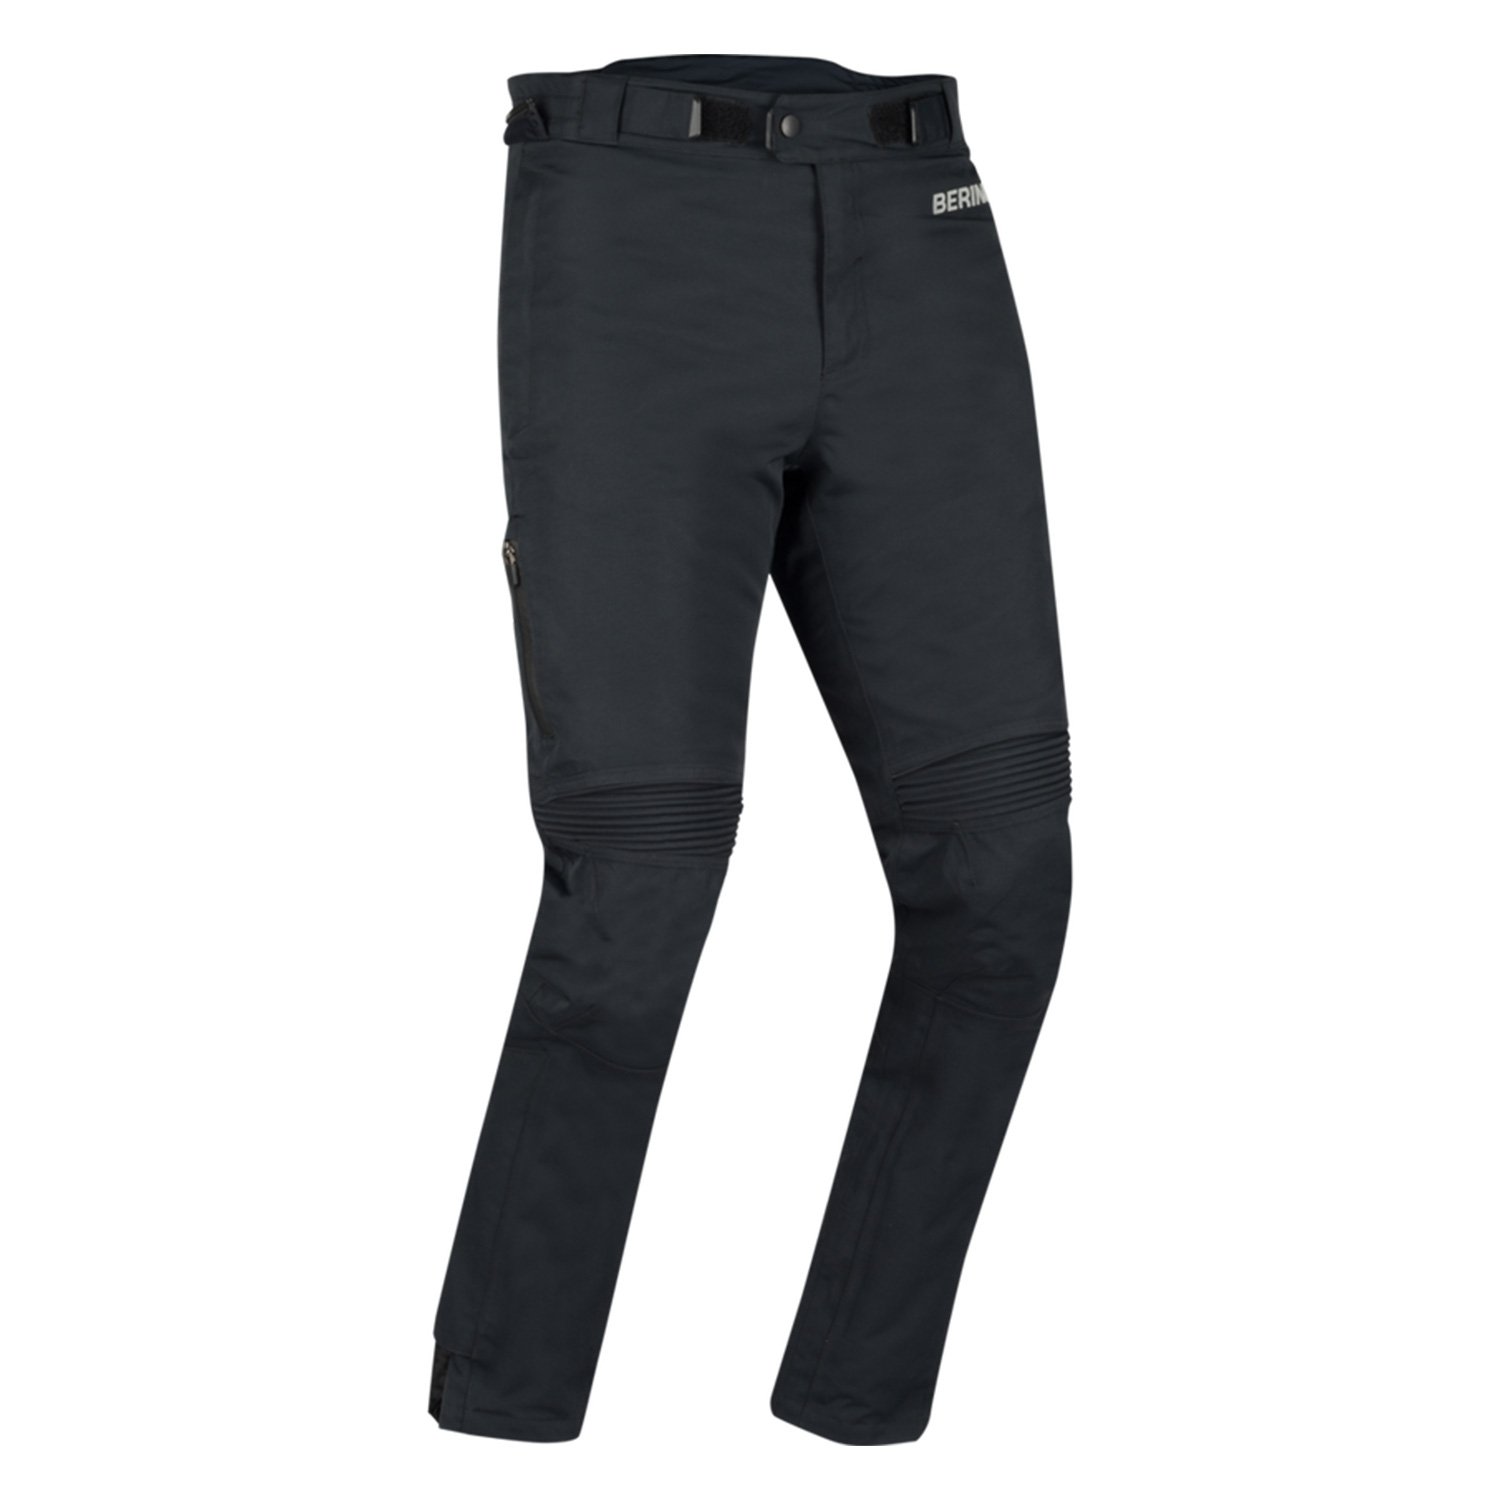 Image of EU Bering Zephyr Trousers Black Taille 2XL